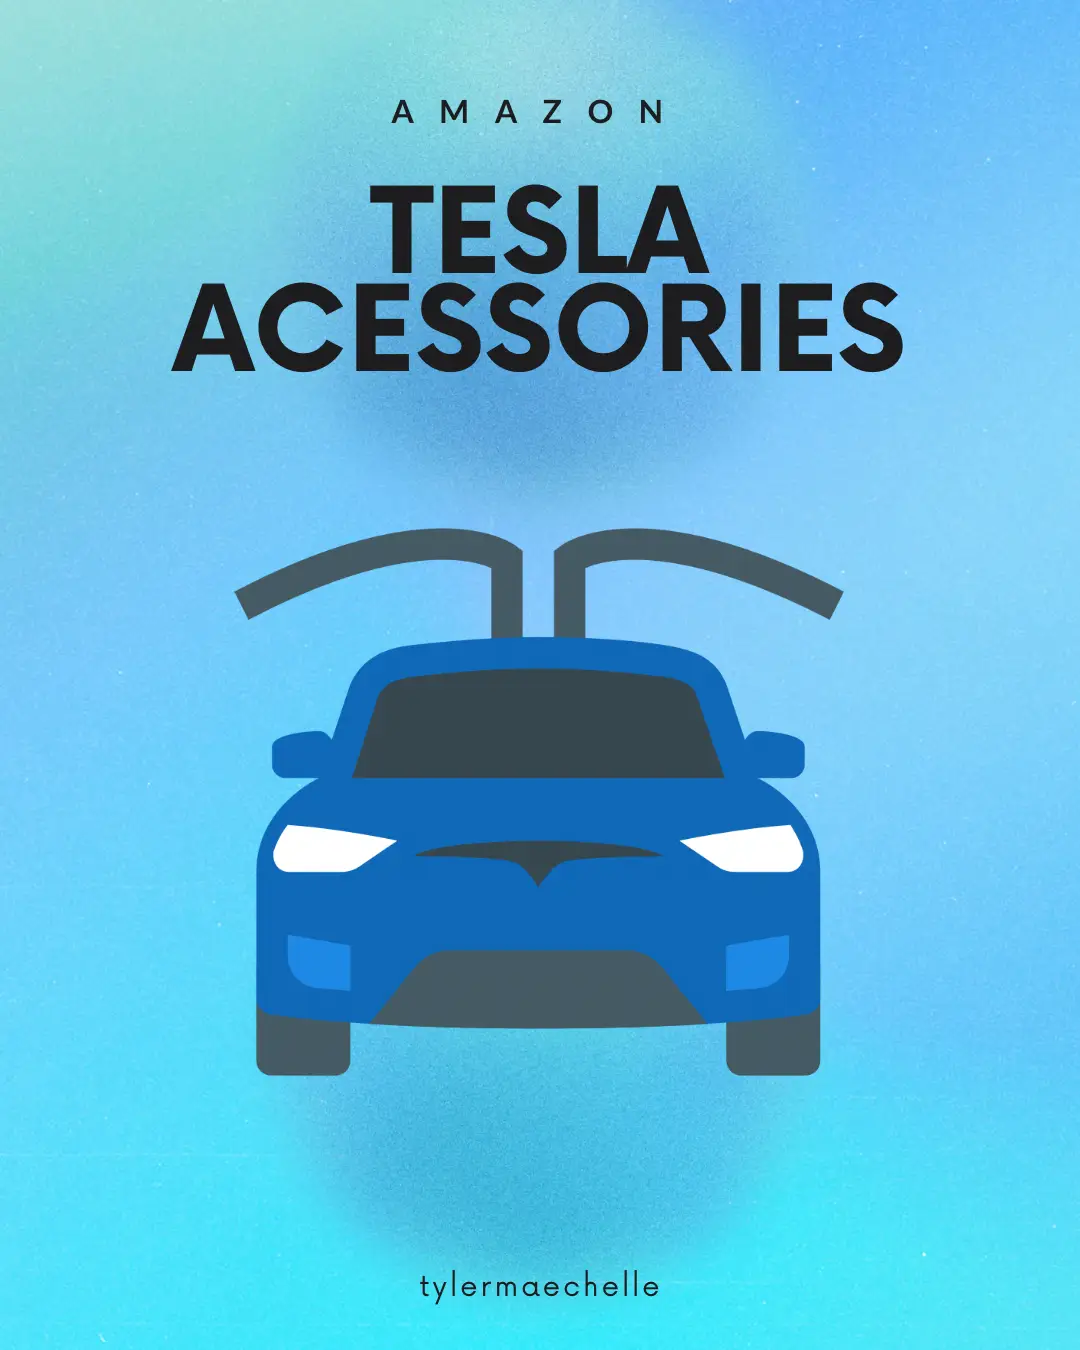 Tesla Accessories, Gallery posted by TylerMaechelle